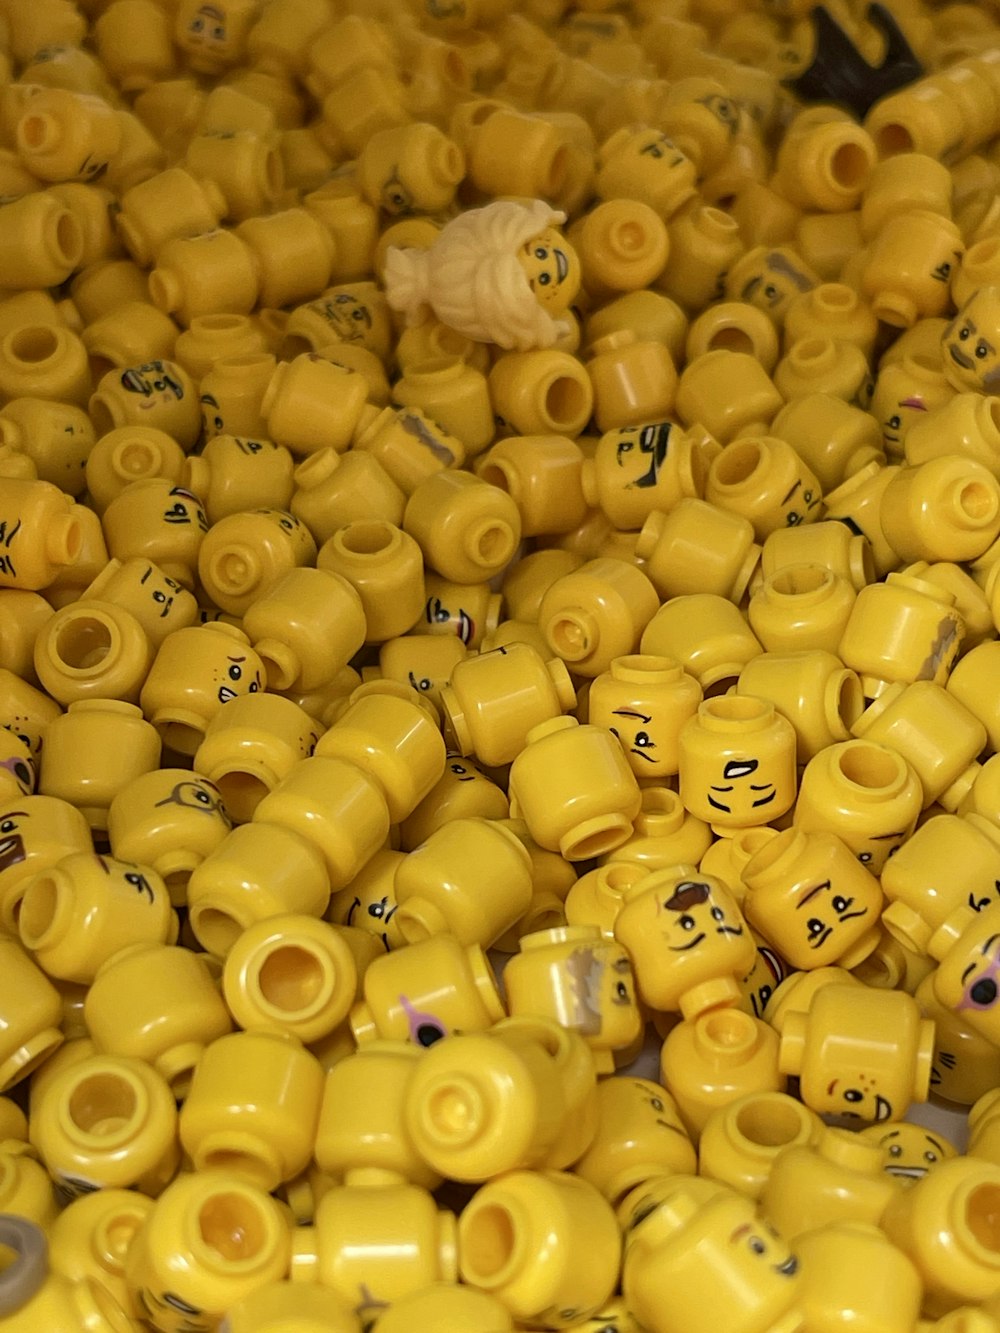 a large pile of yellow rubber ducks